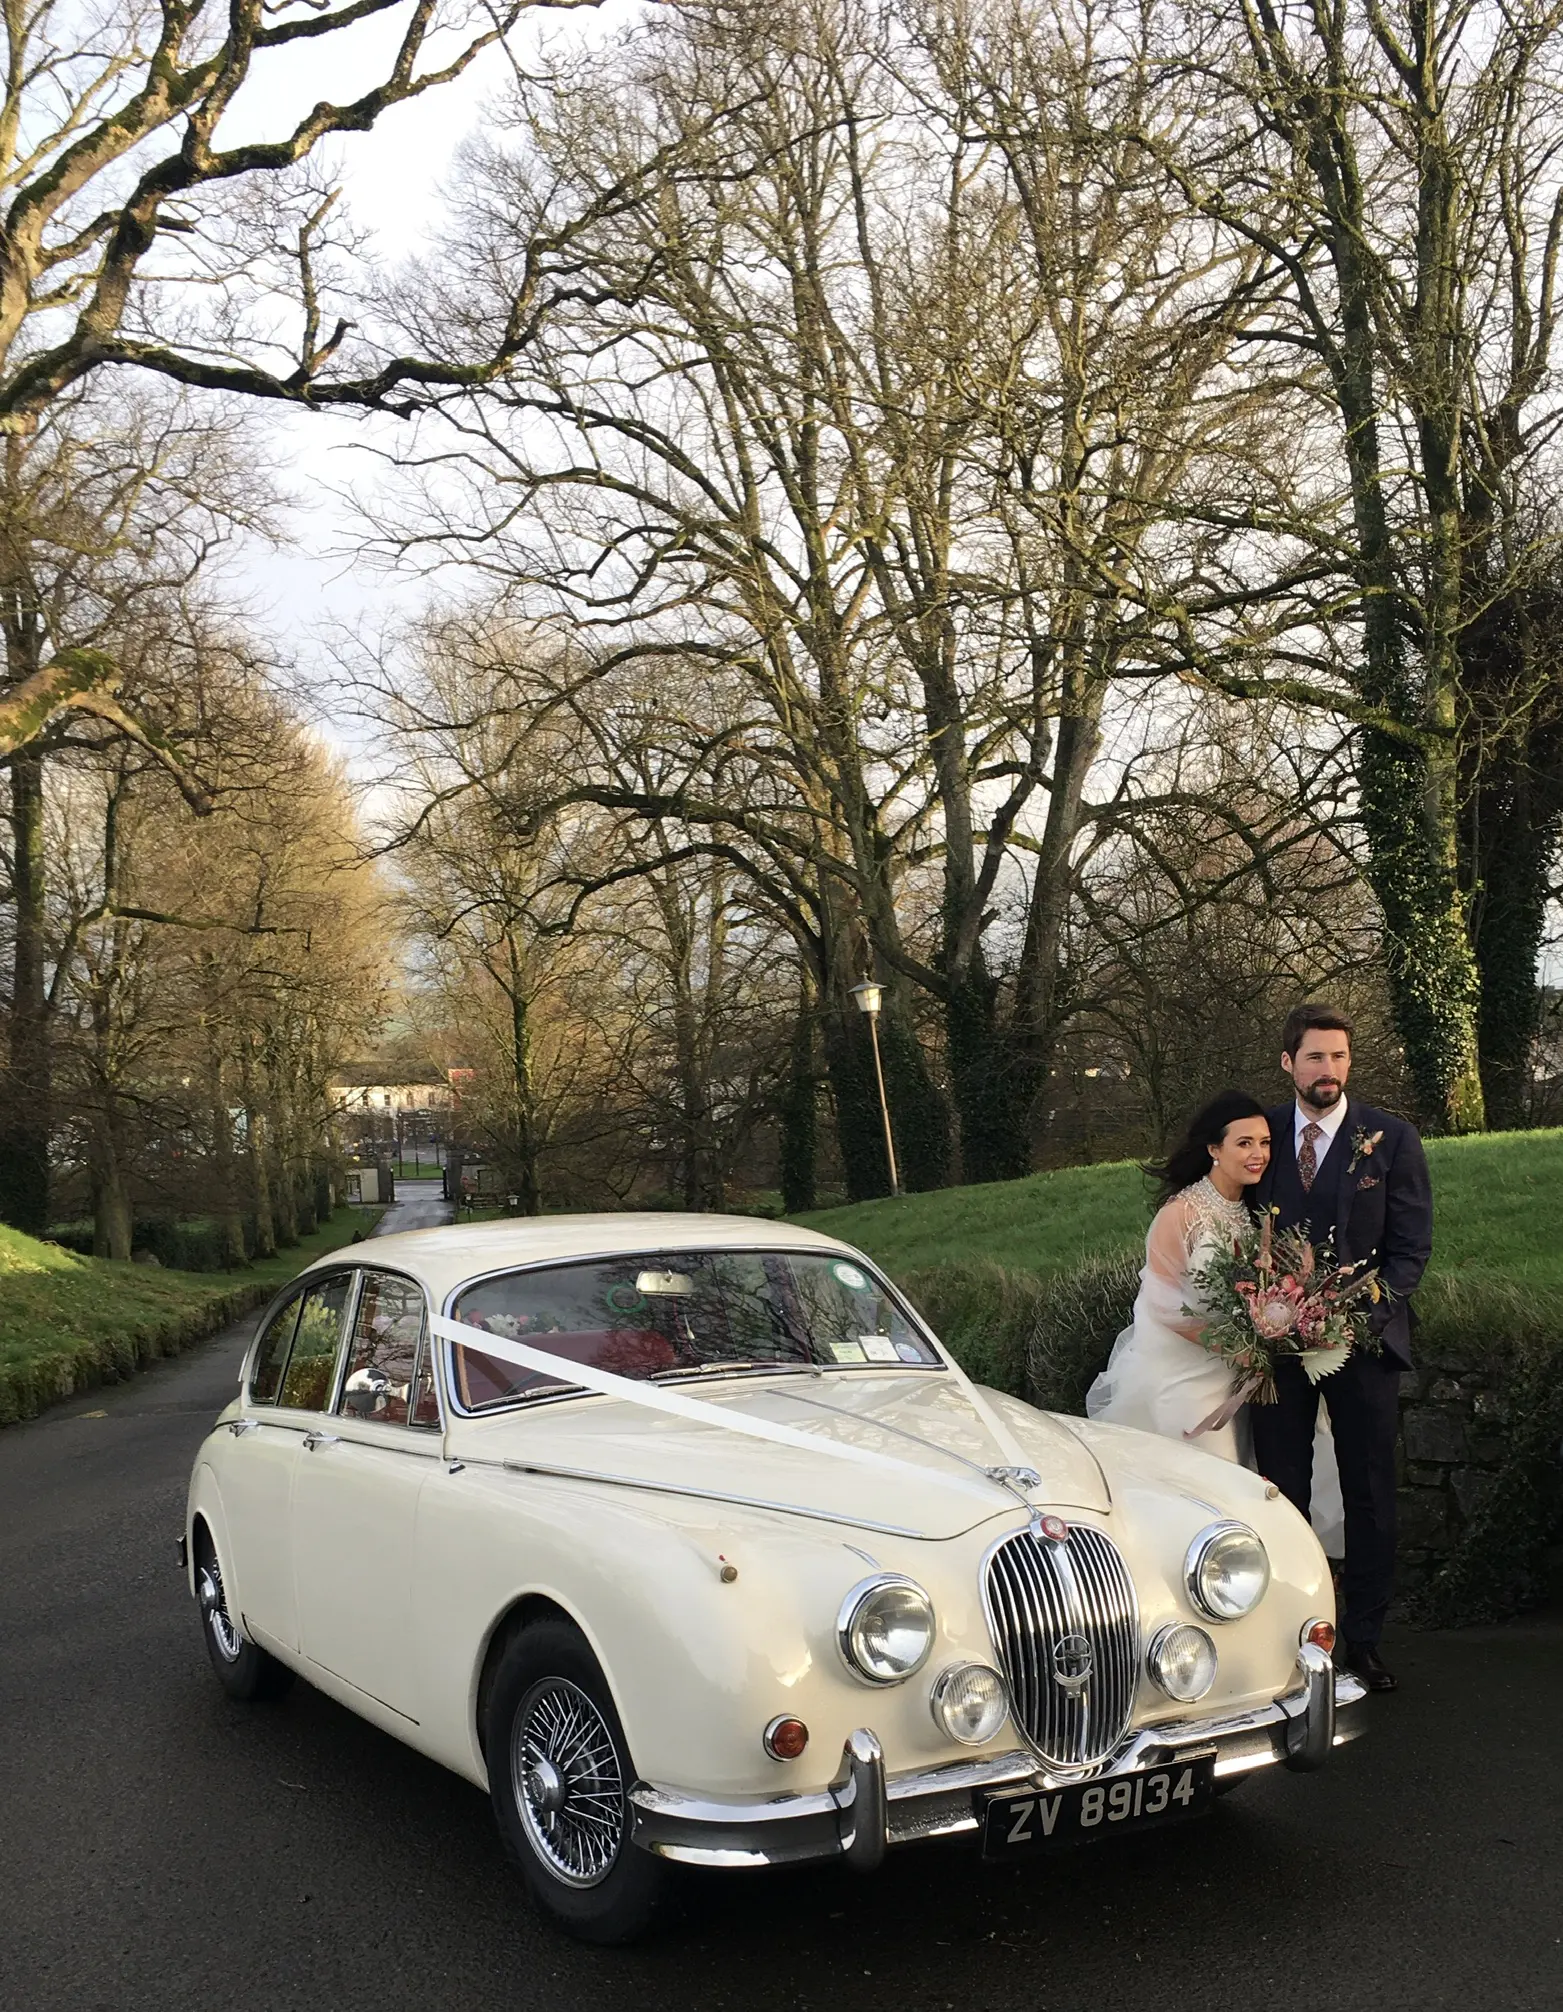 Wedding with one of our Jaguar wedding cars